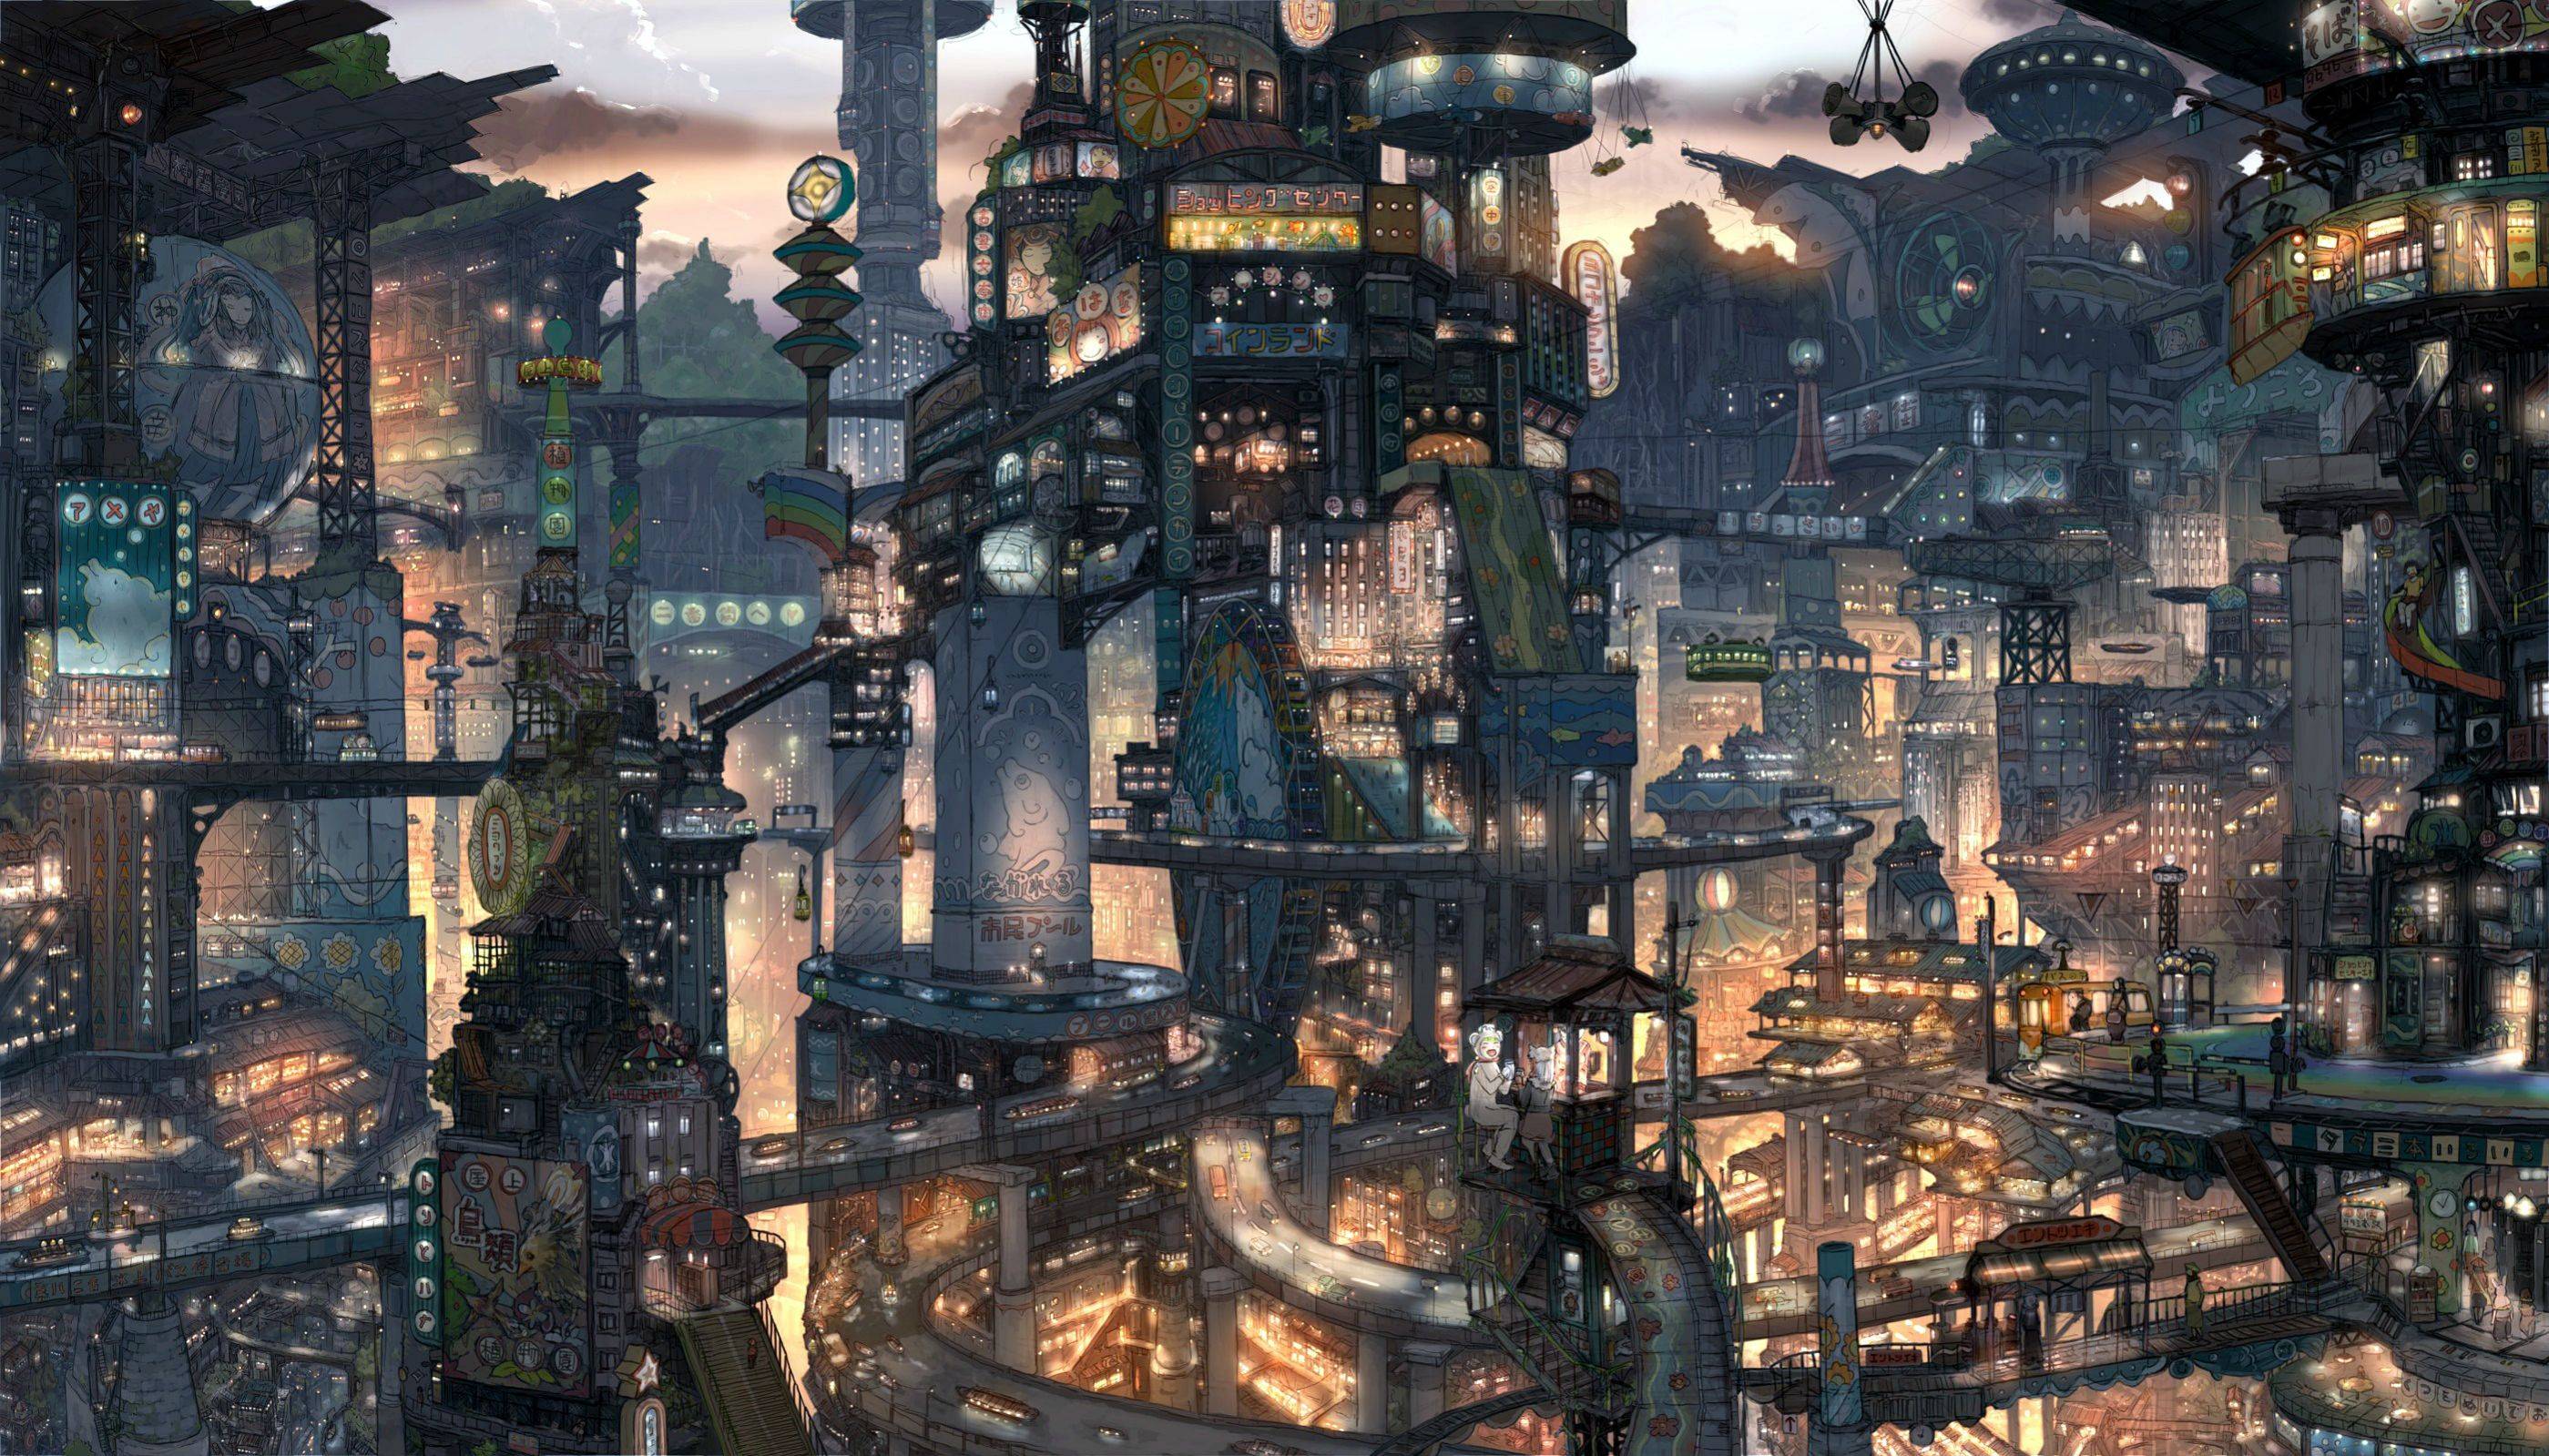 Carnival - City of Lights (source unknown) : ImaginaryLandscapes